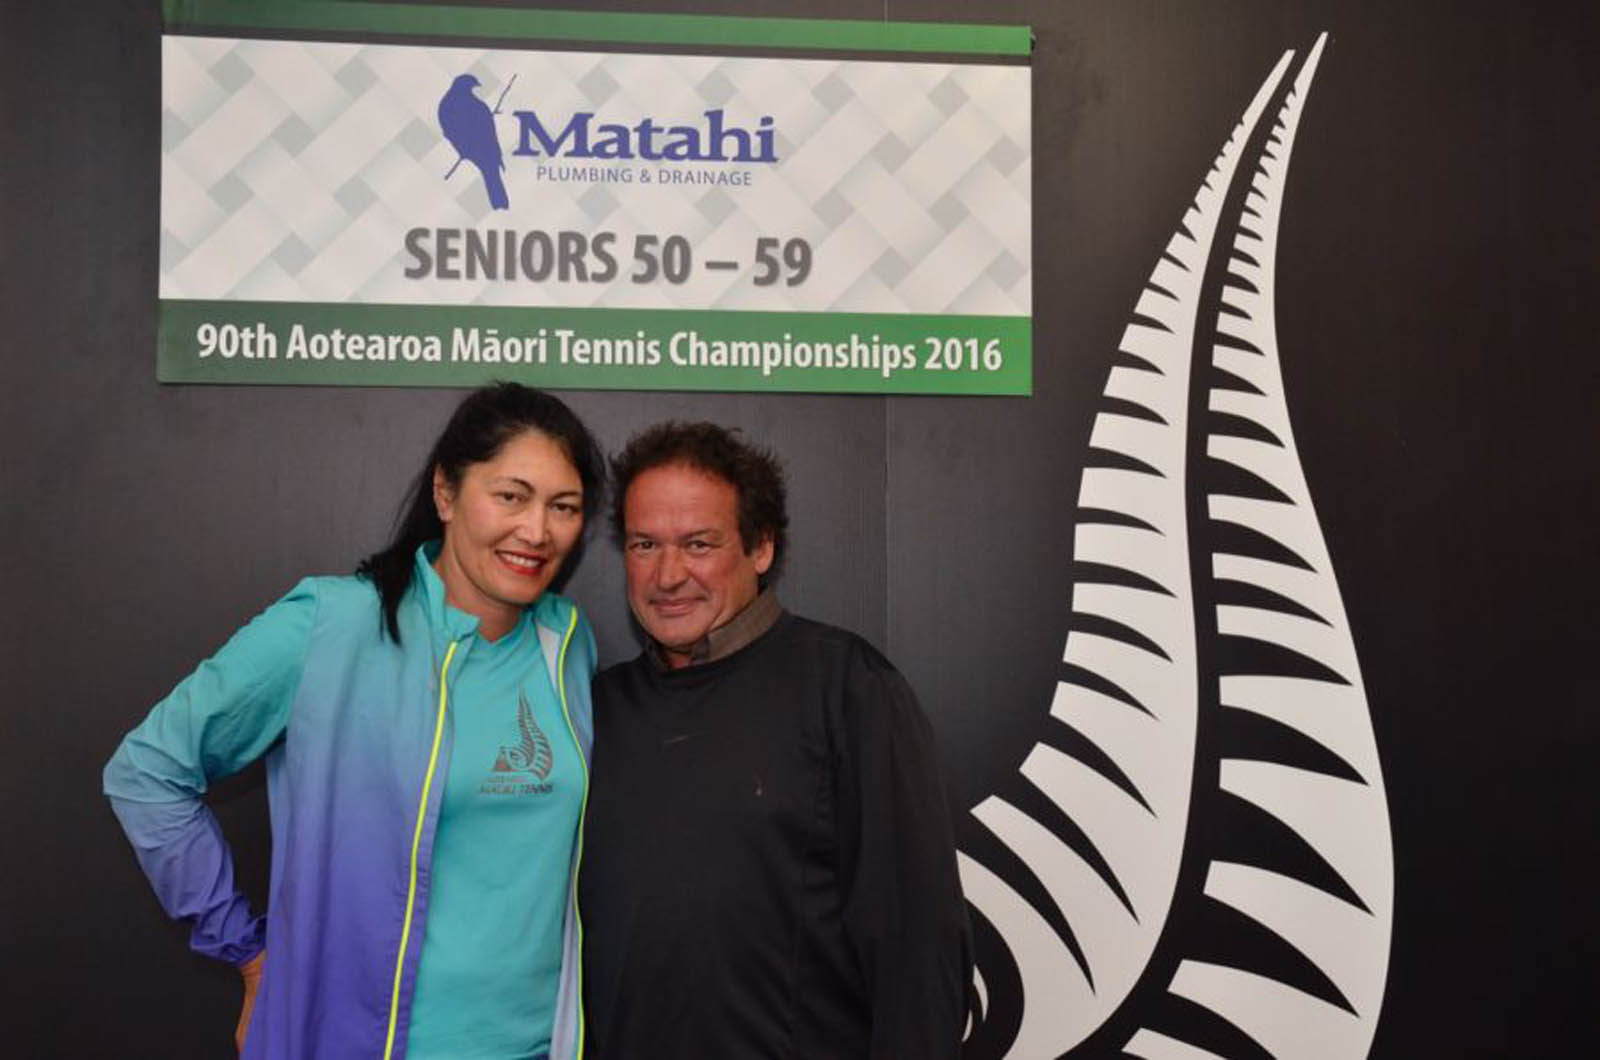 50-59 Mixed Doubles Winners - Tia Van Selm Ormsby and Wayne Thomson